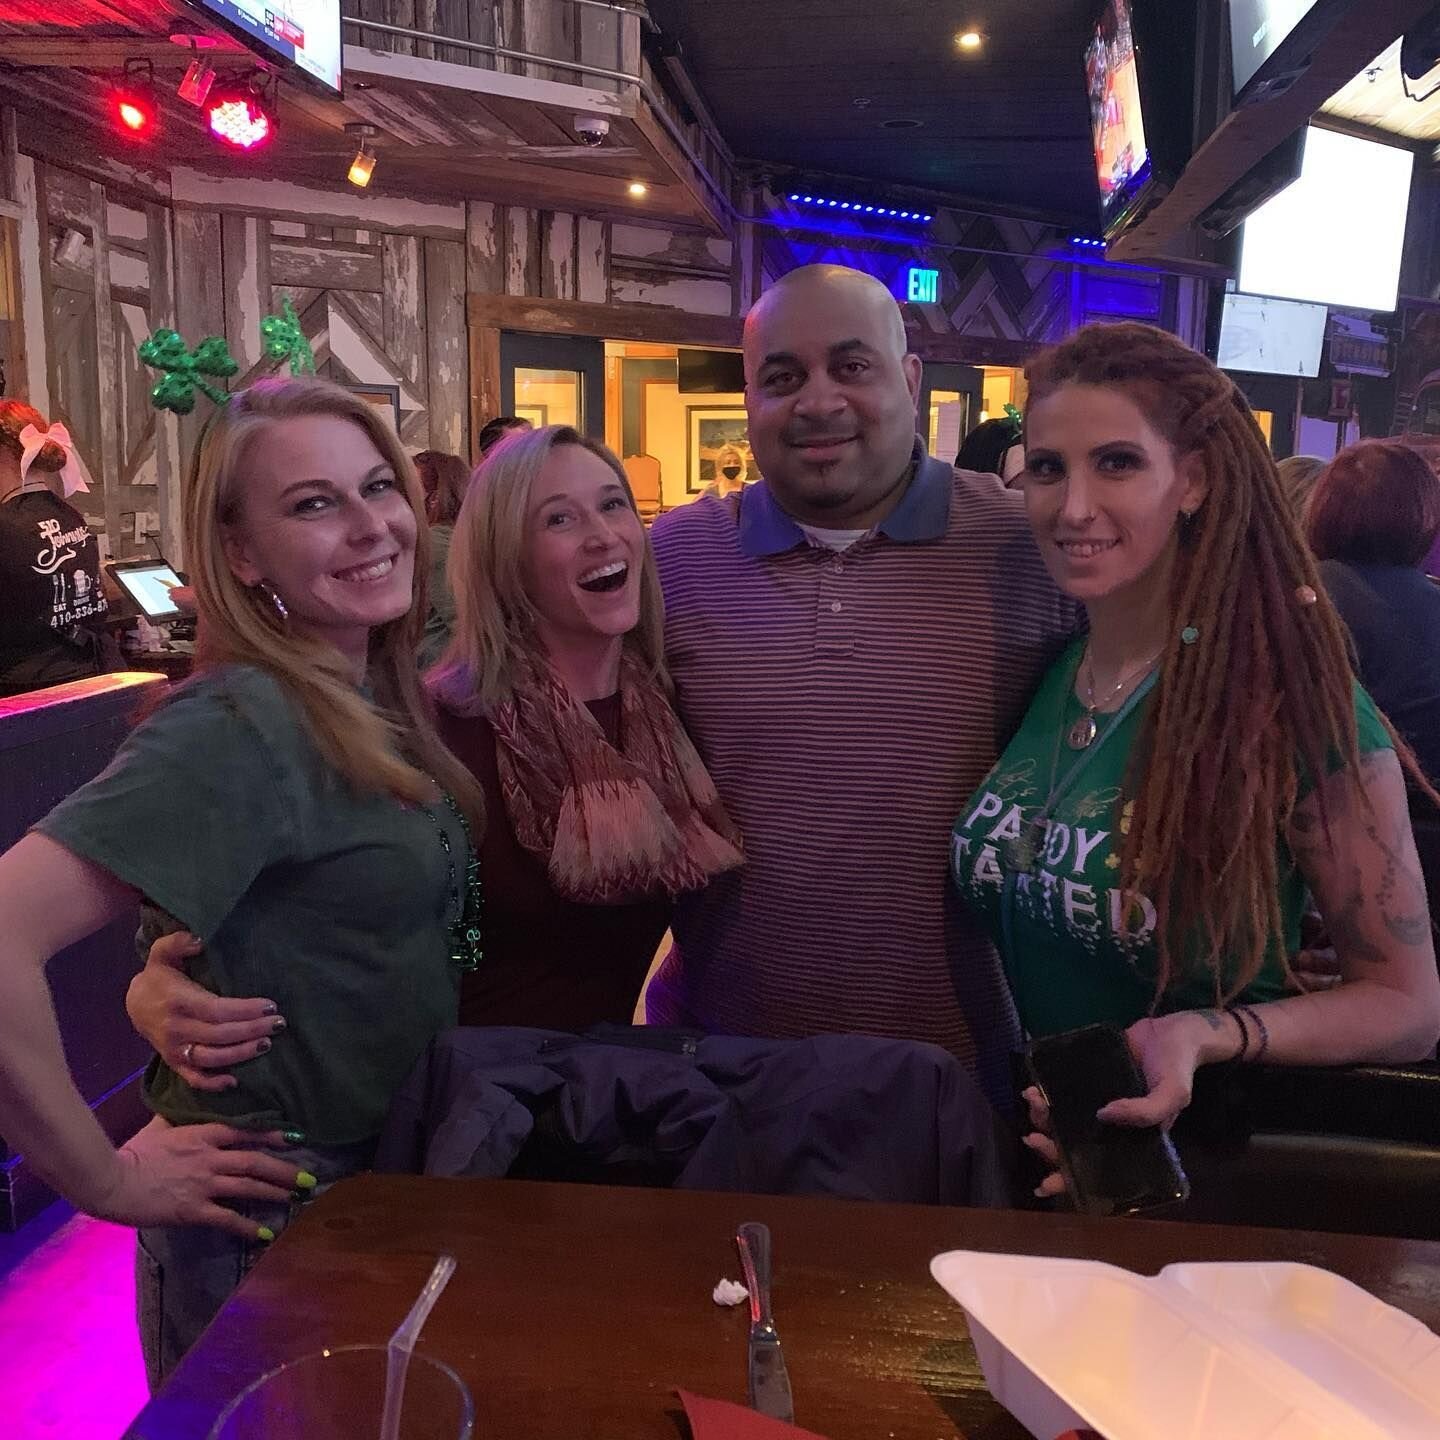 Baltimore just had an amazing Saint Patrick's Day Renegade! &quot;We are so happy to build community in Baltimore and the surrounding area! If you haven&rsquo;t been to an event, come join us!... Every first Friday of the month we have a social gathe